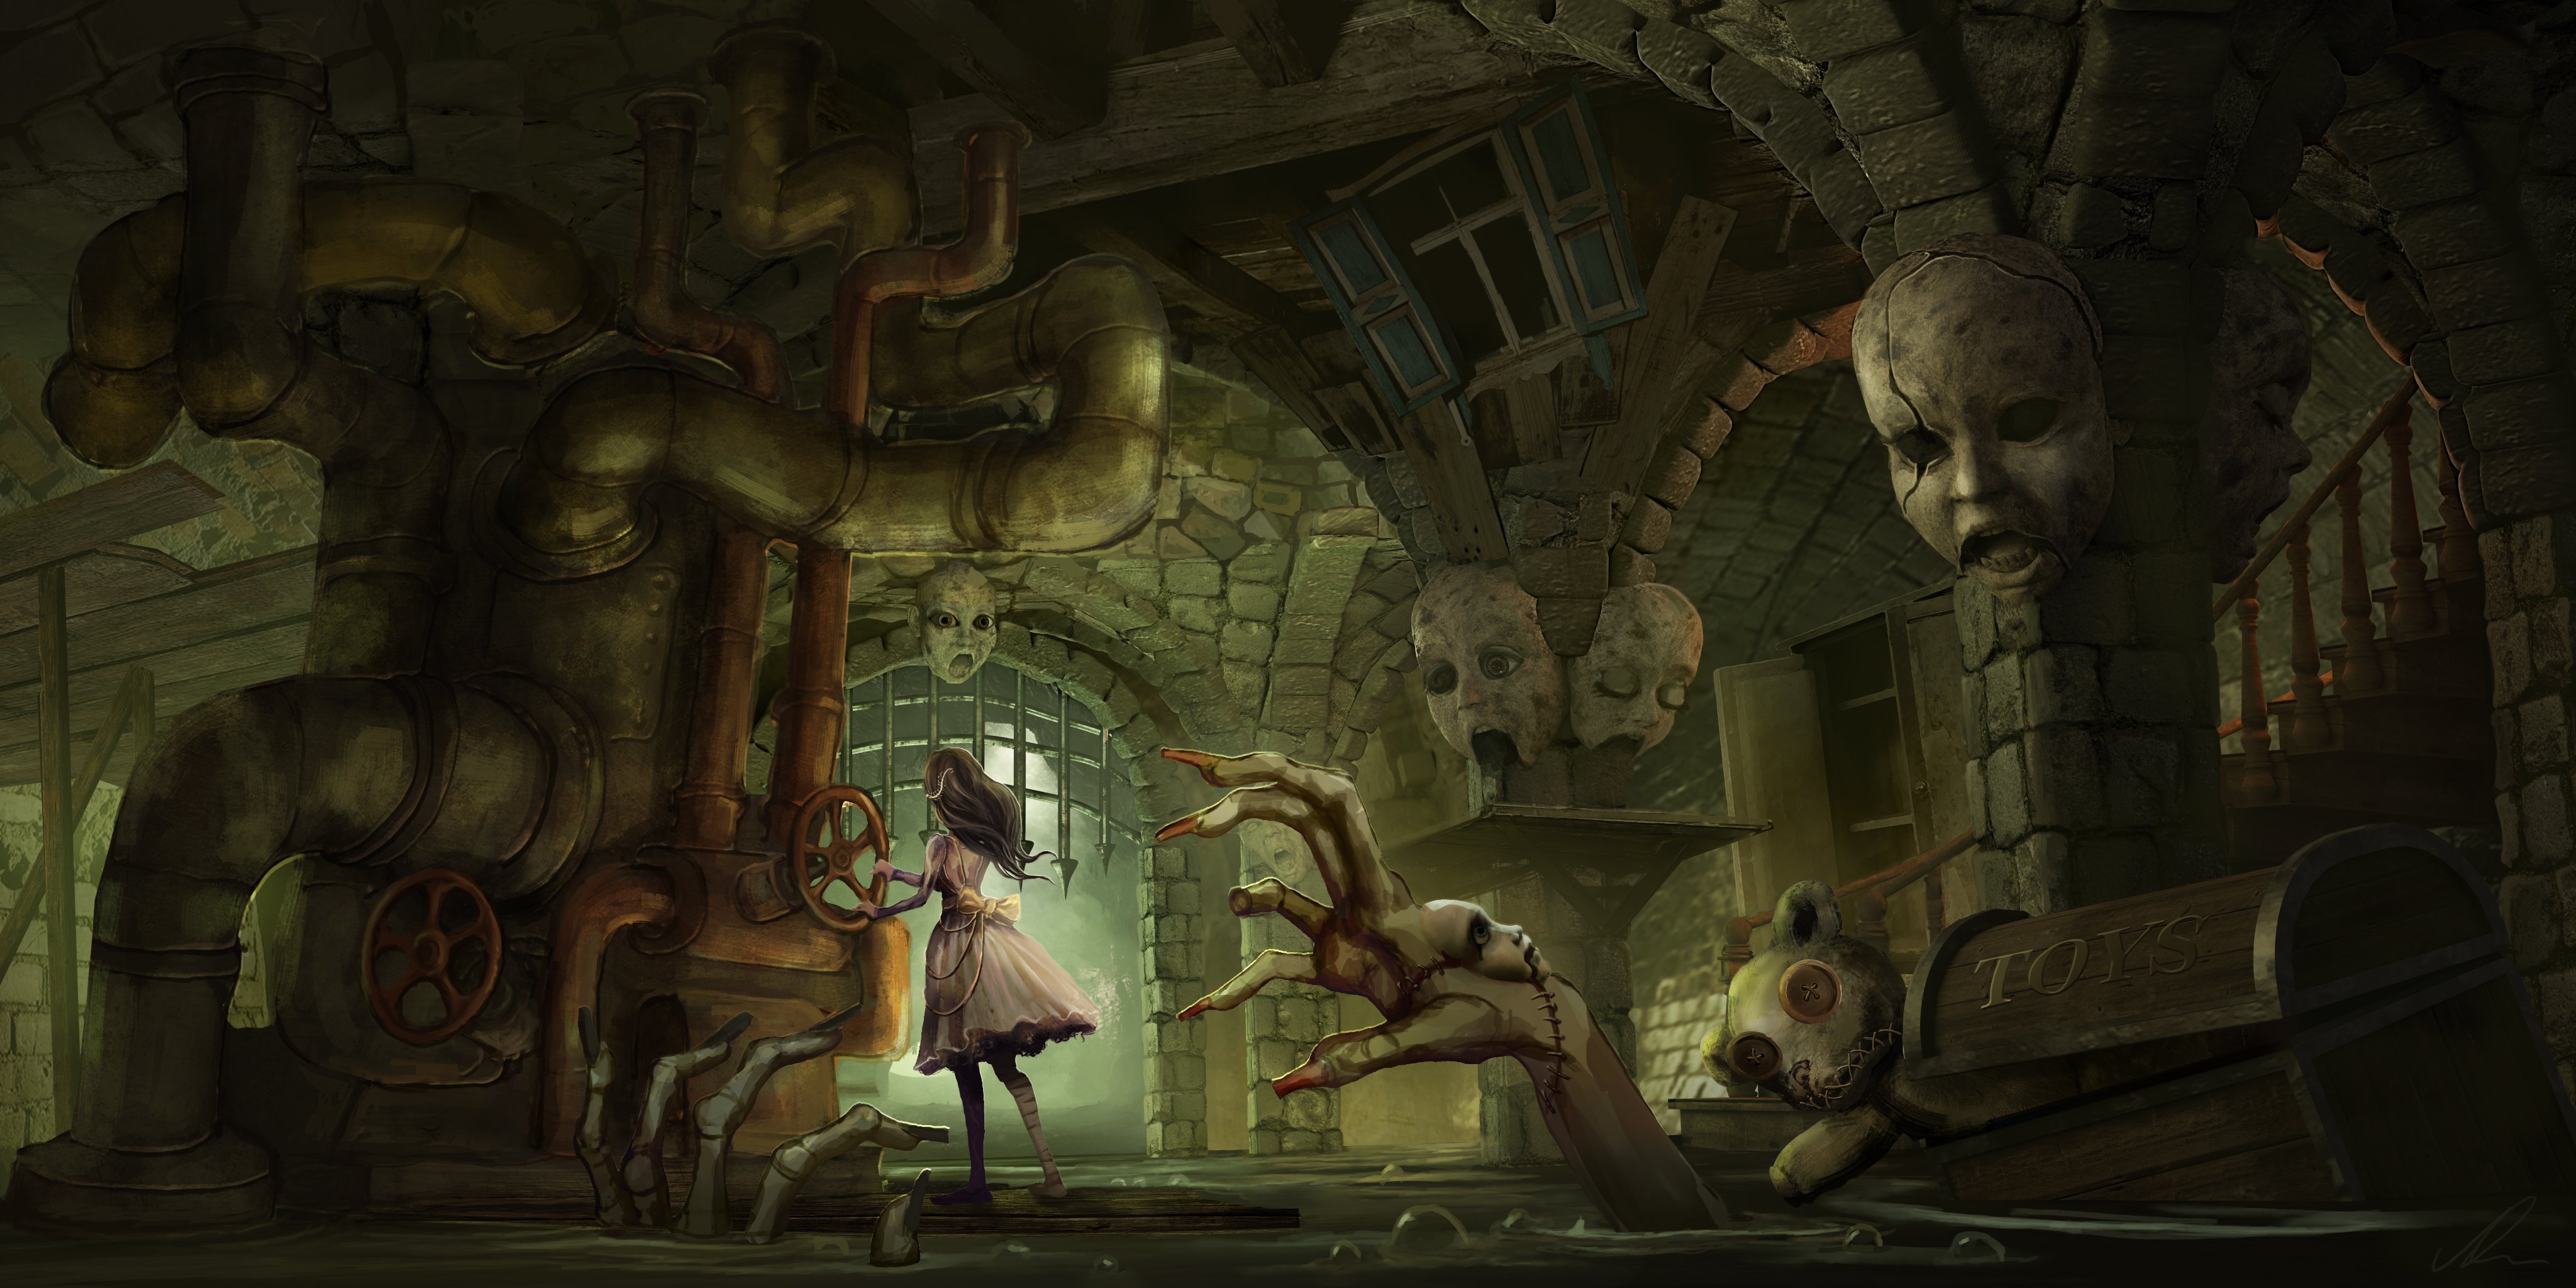 American McGee steps away from development as EA turns down Alice: Asylum